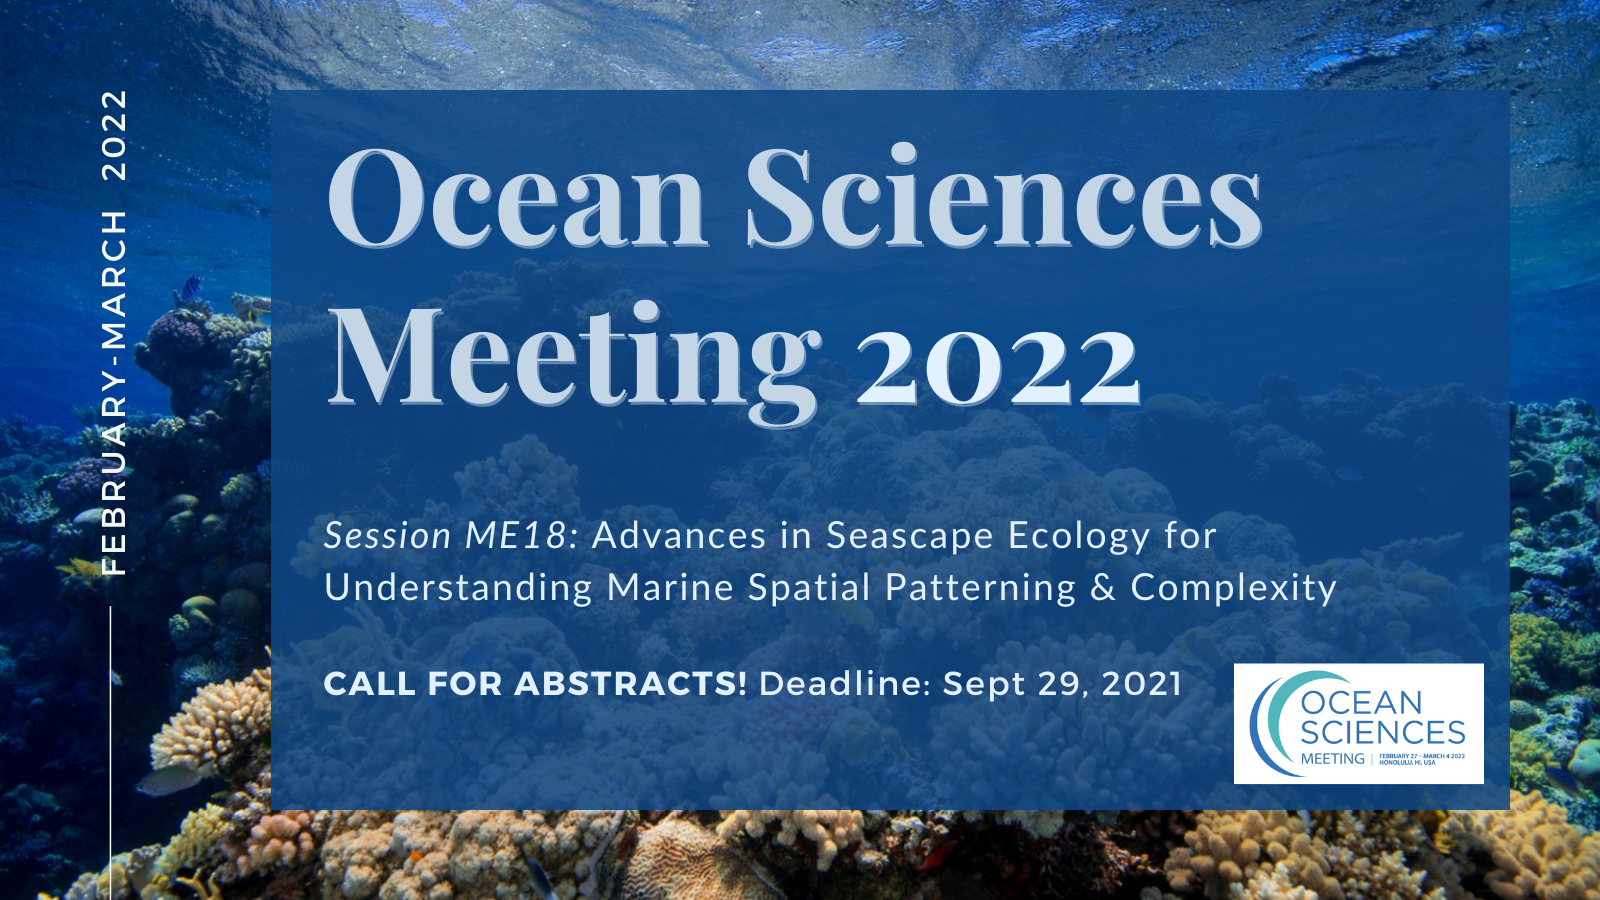 Exploring Advances in Seascape Ecology at the 2022 Ocean Sciences